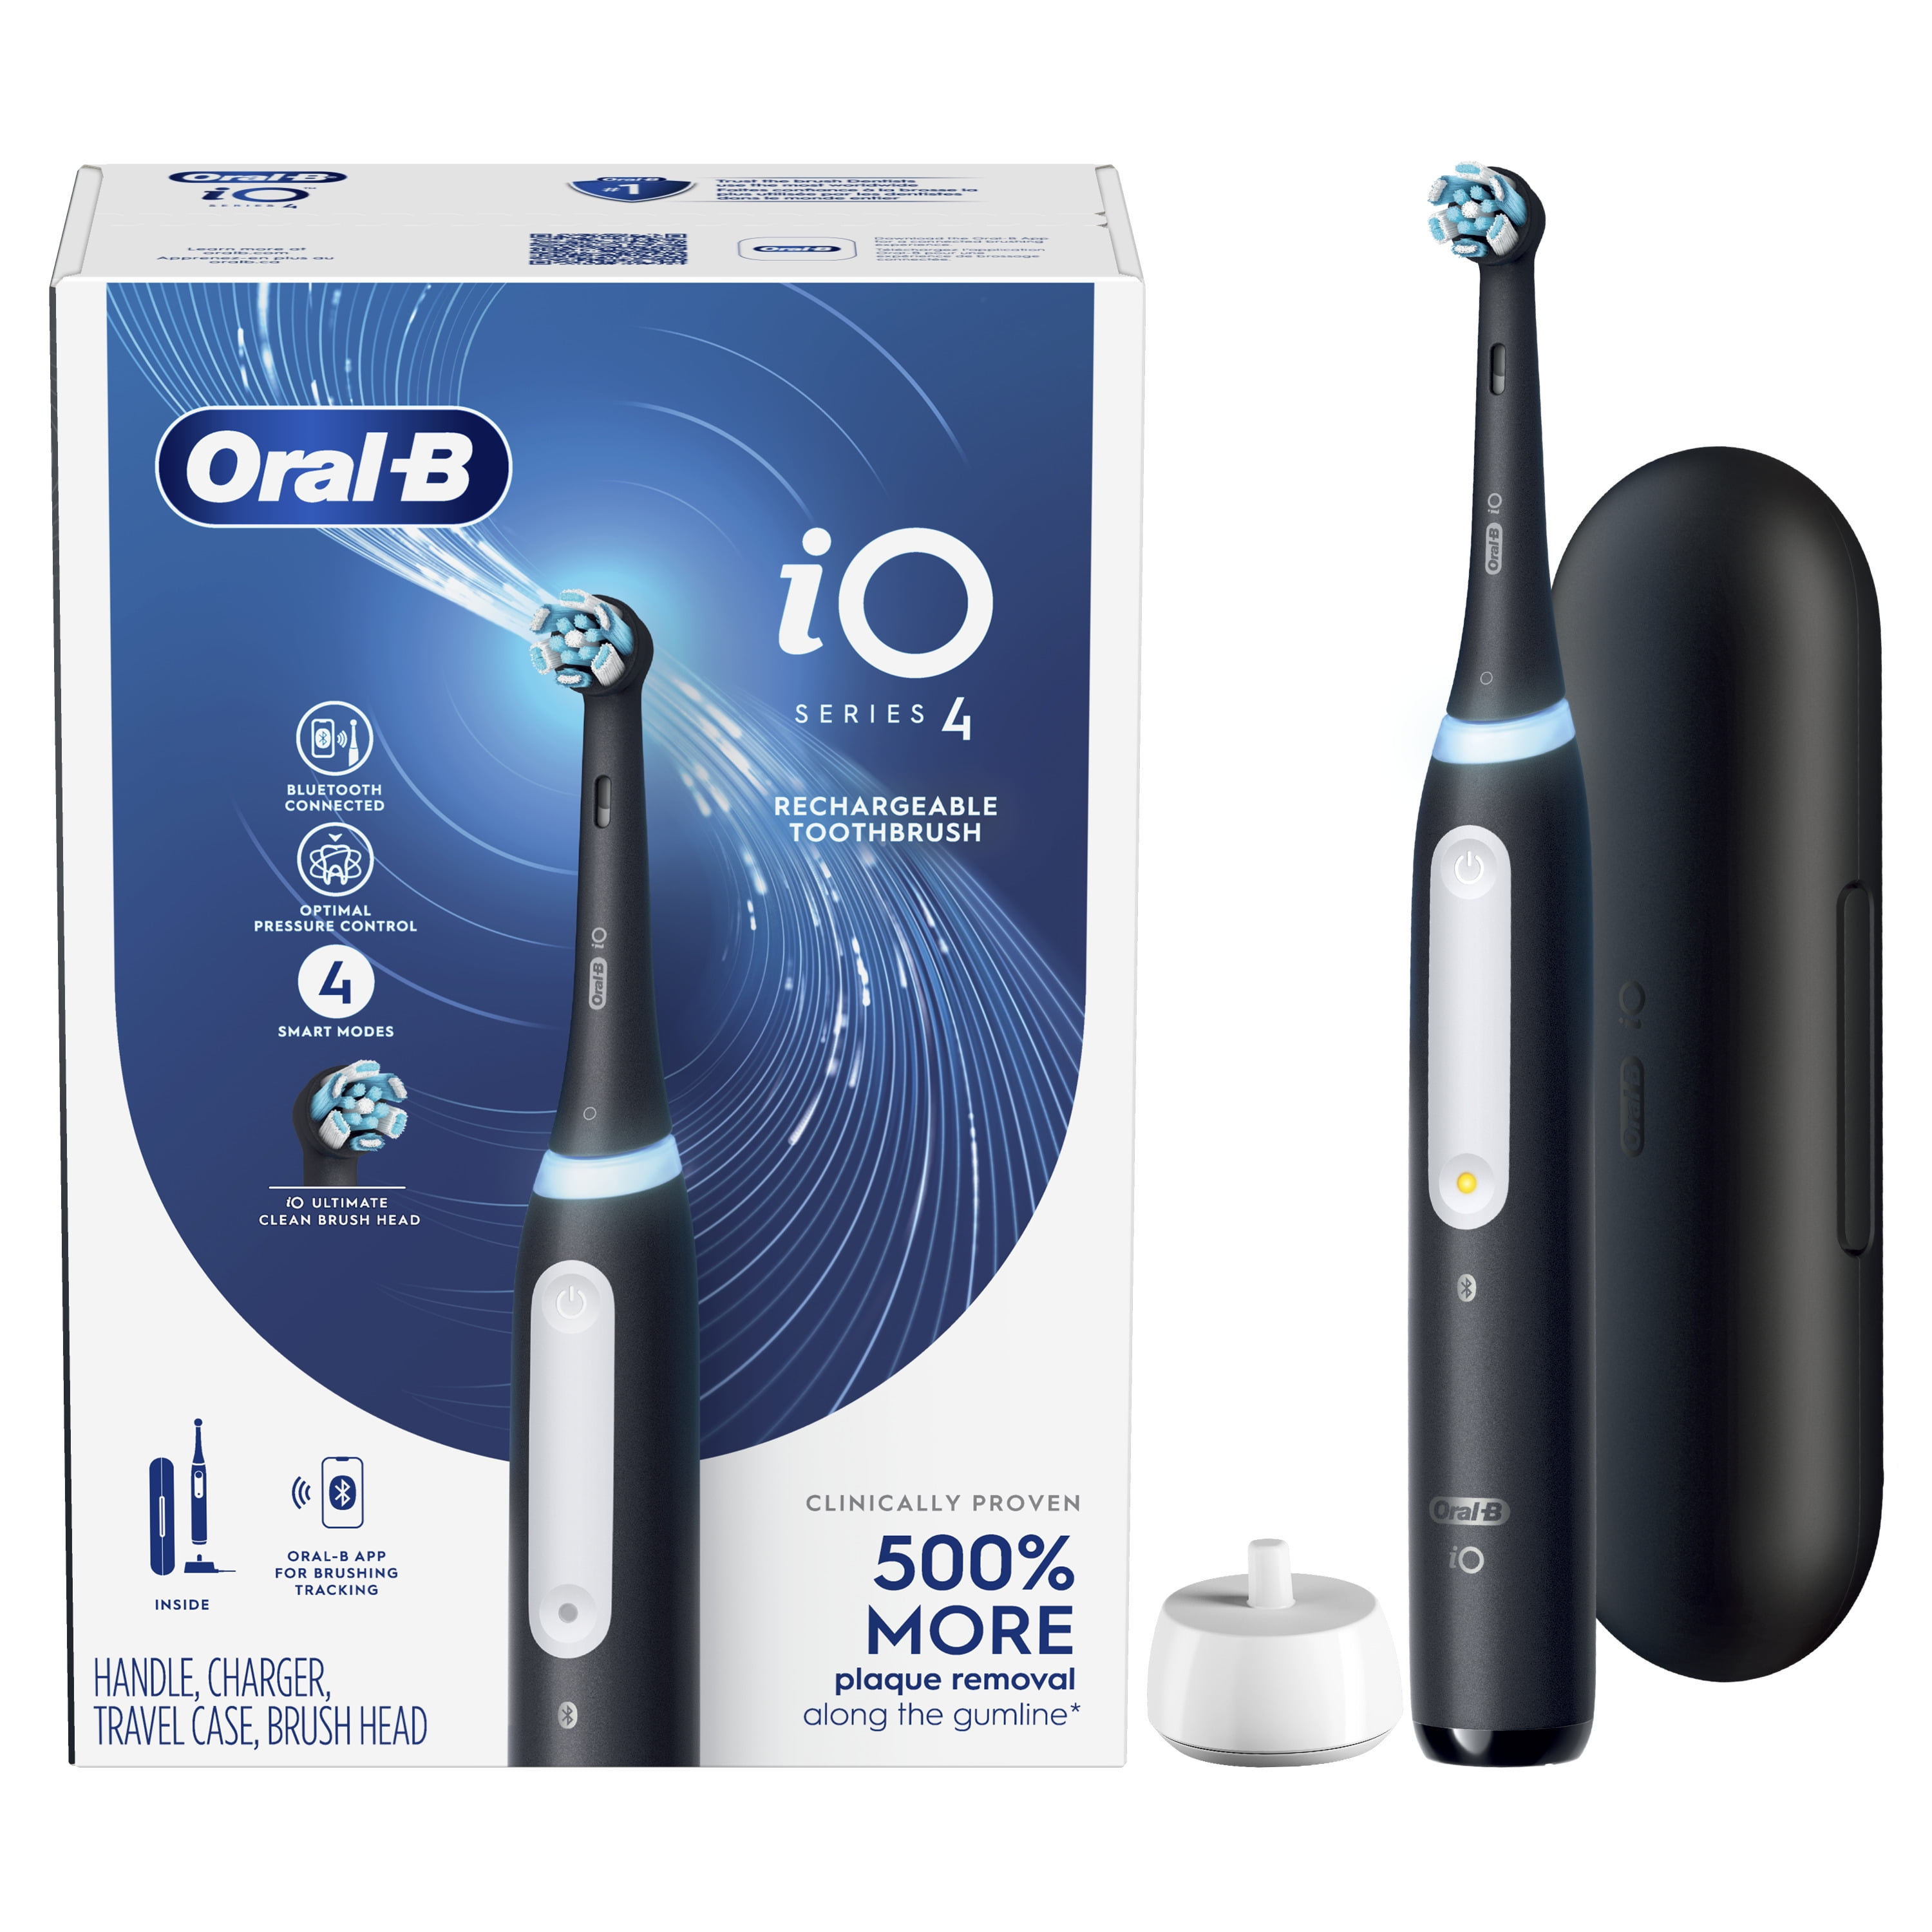 (1) Oral-B Rechargeable, iO Head, Toothbrush Black 4 Series Electric with Brush